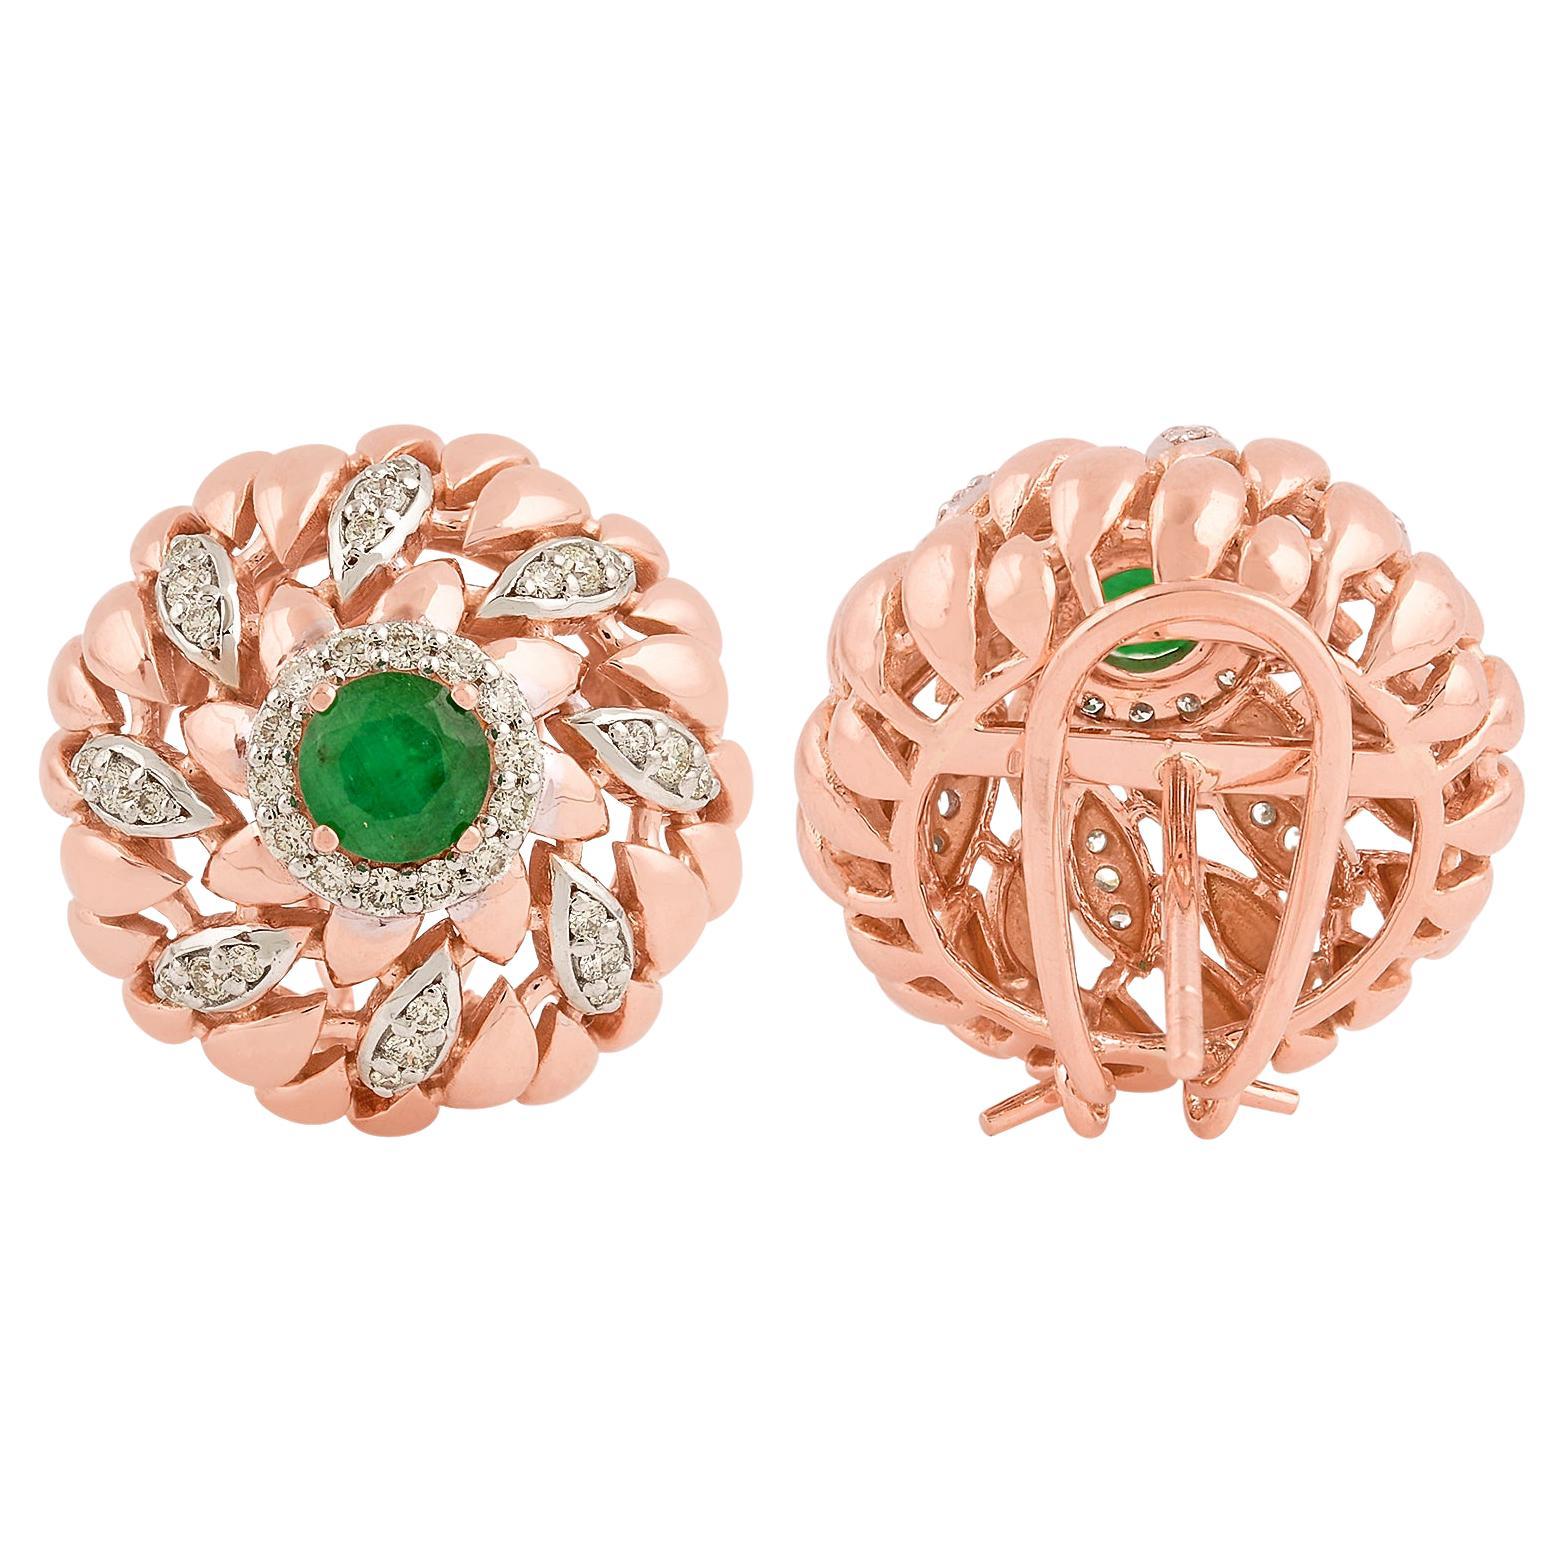 Natural Emerald Gemstone Stud Earrings Diamond Pave Solid 18k Rose Gold Jewelry For Sale